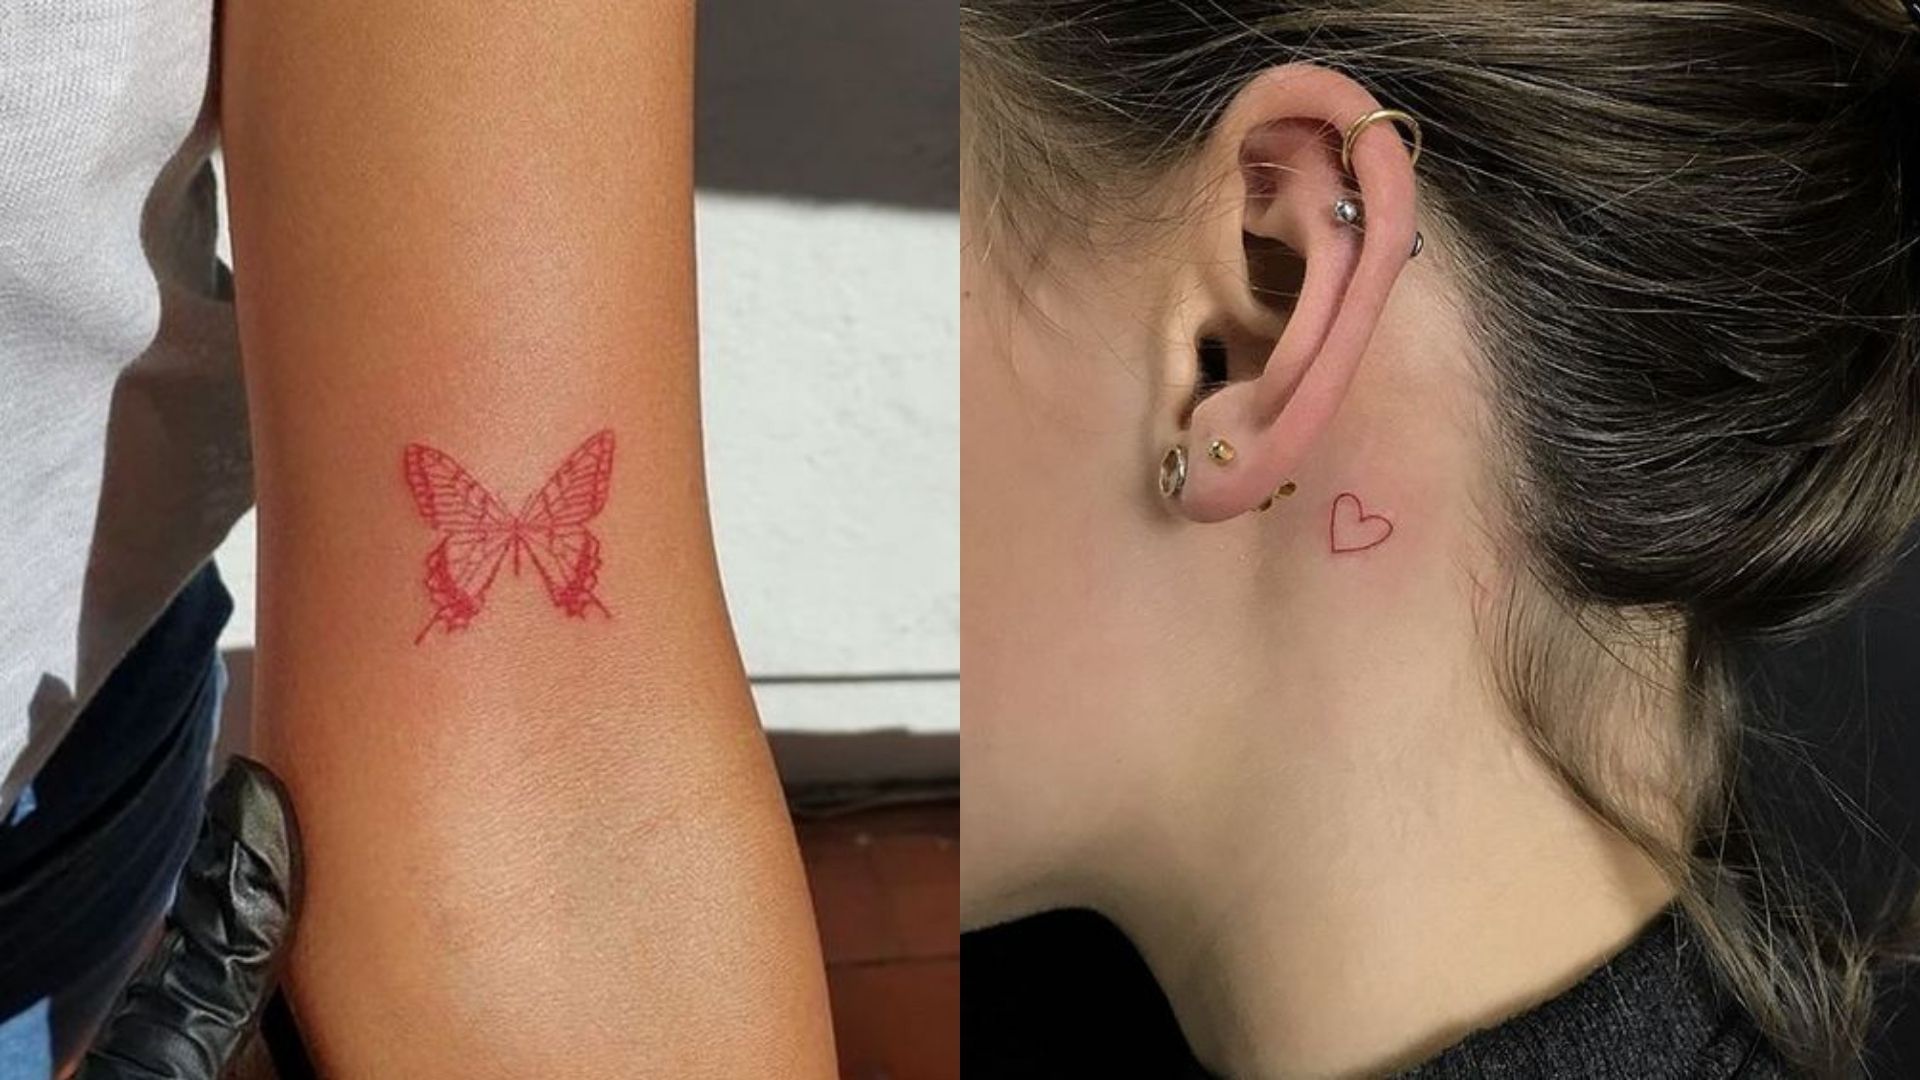 40 Dainty Small Tattoo Ideas For Women That You Should Totally Consider